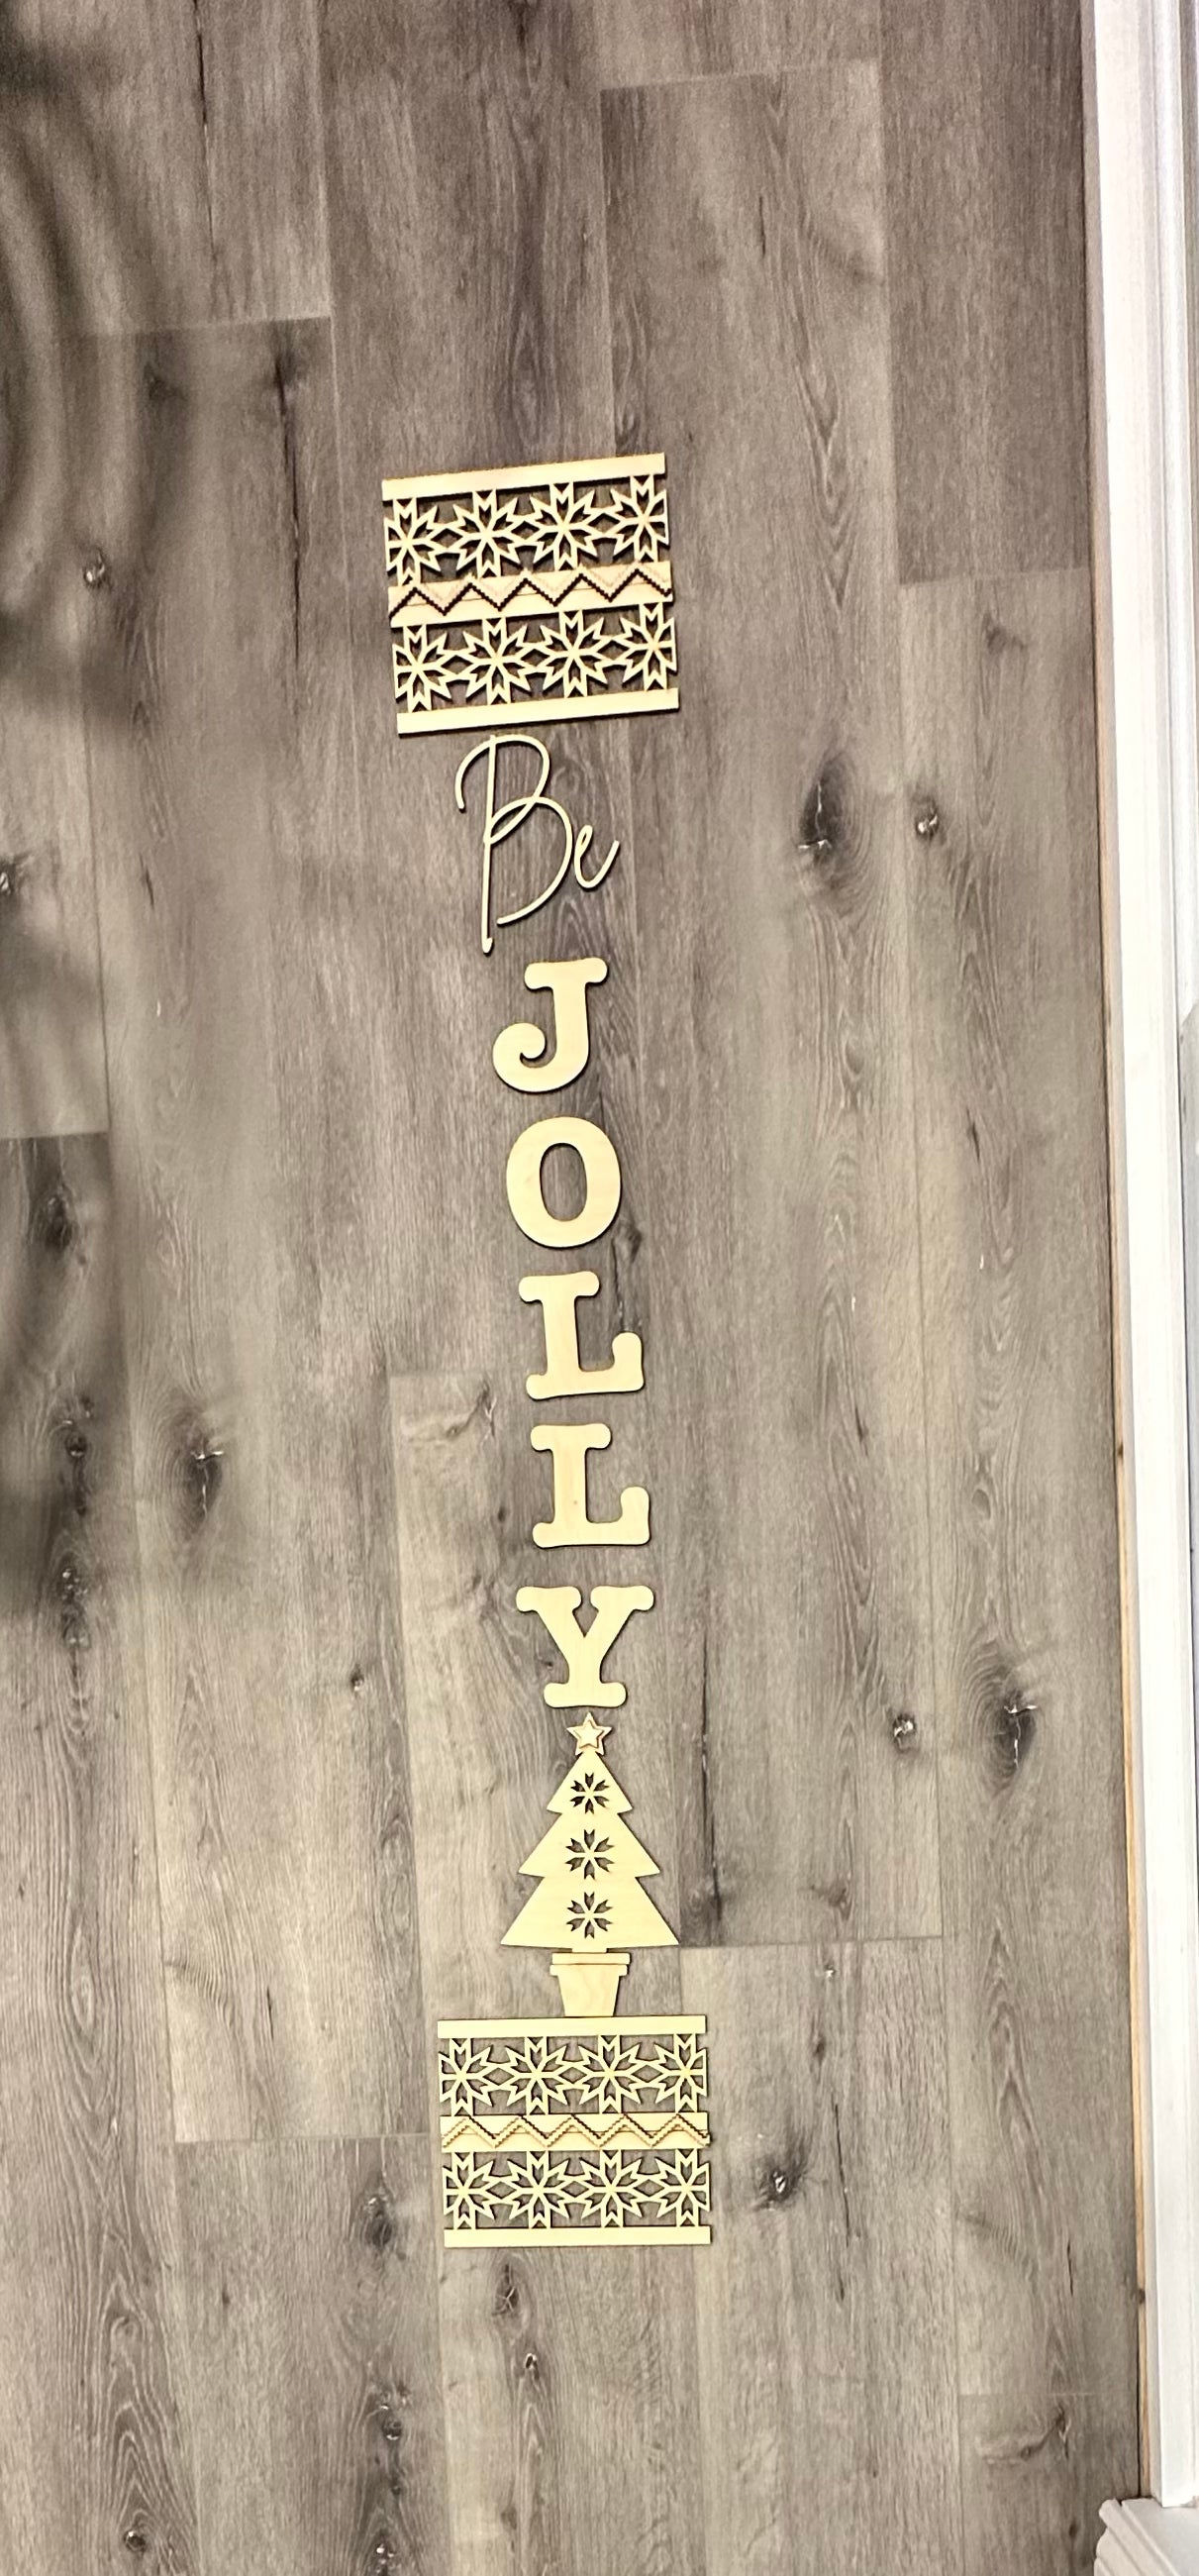 Be Jolly Knit Wood Sign DIY Porch Leaner